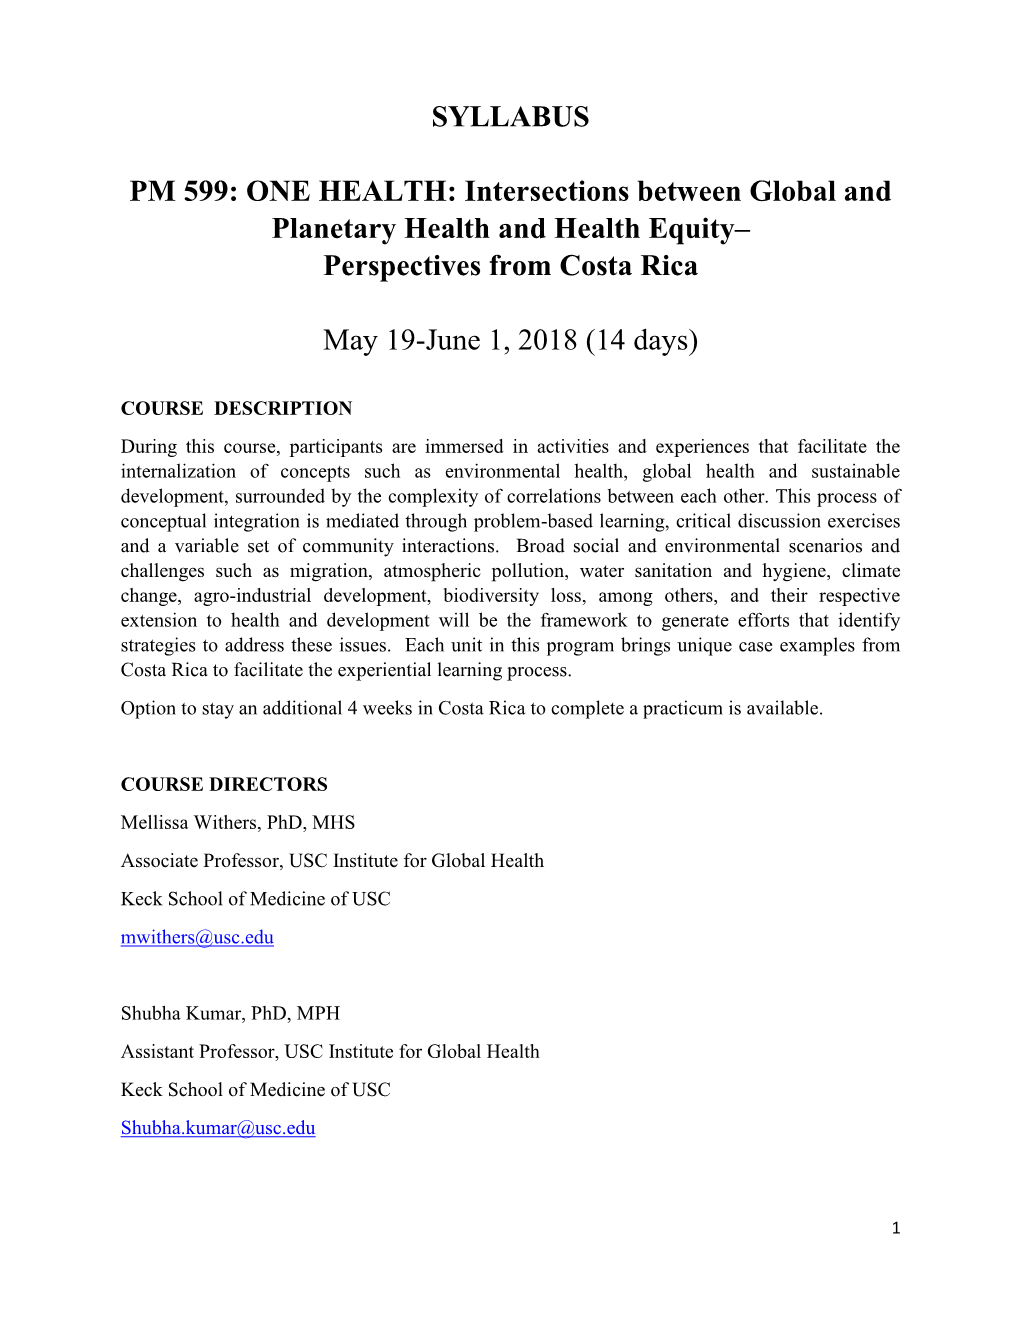 Intersections Between Global and Planetary Health and Health Equity– Perspectives from Costa Rica